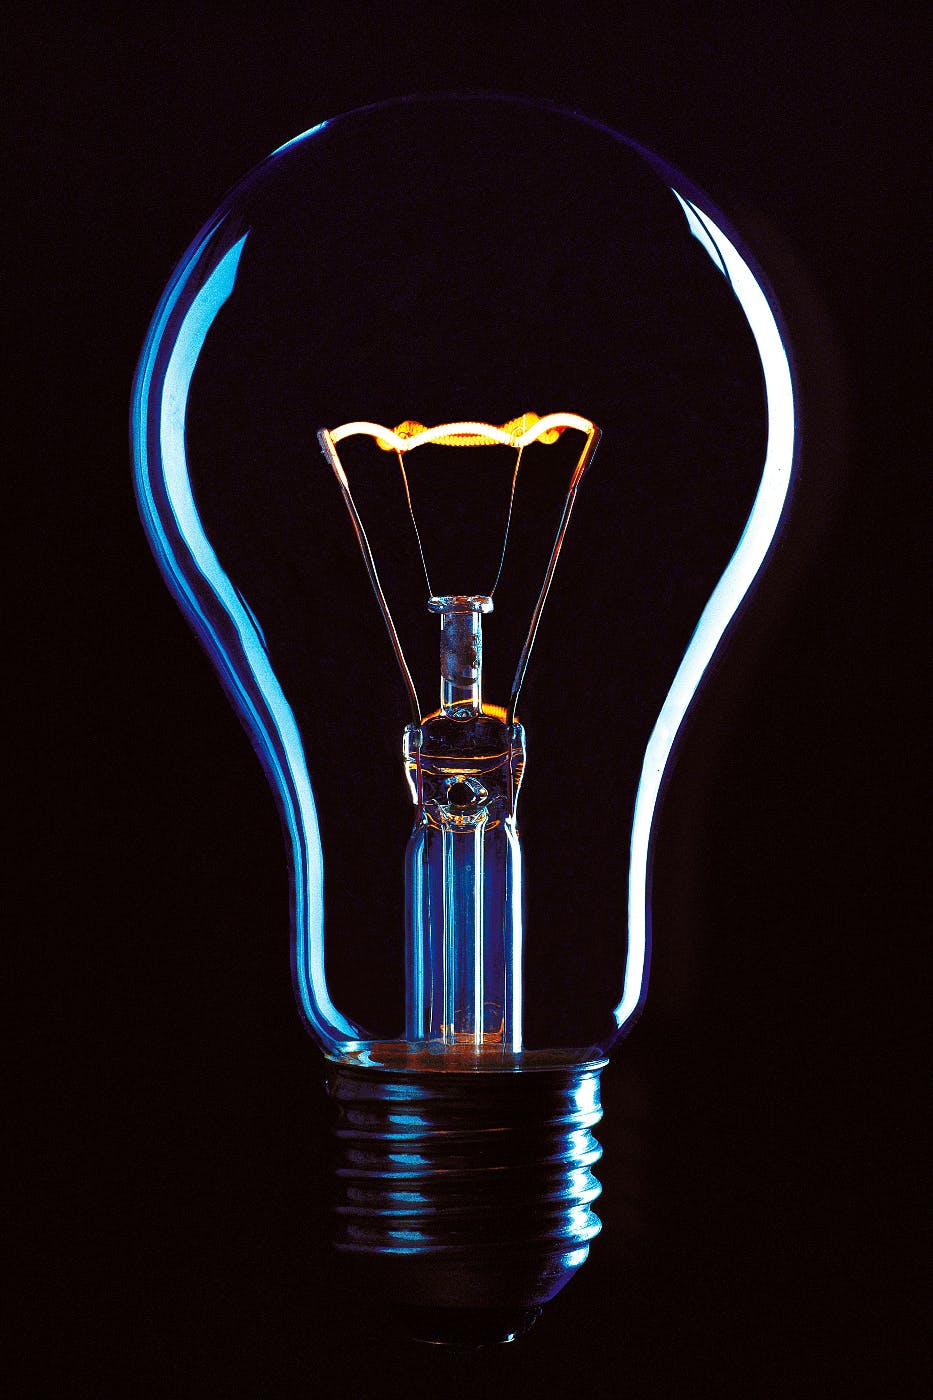 Detailed Image of a light bulb